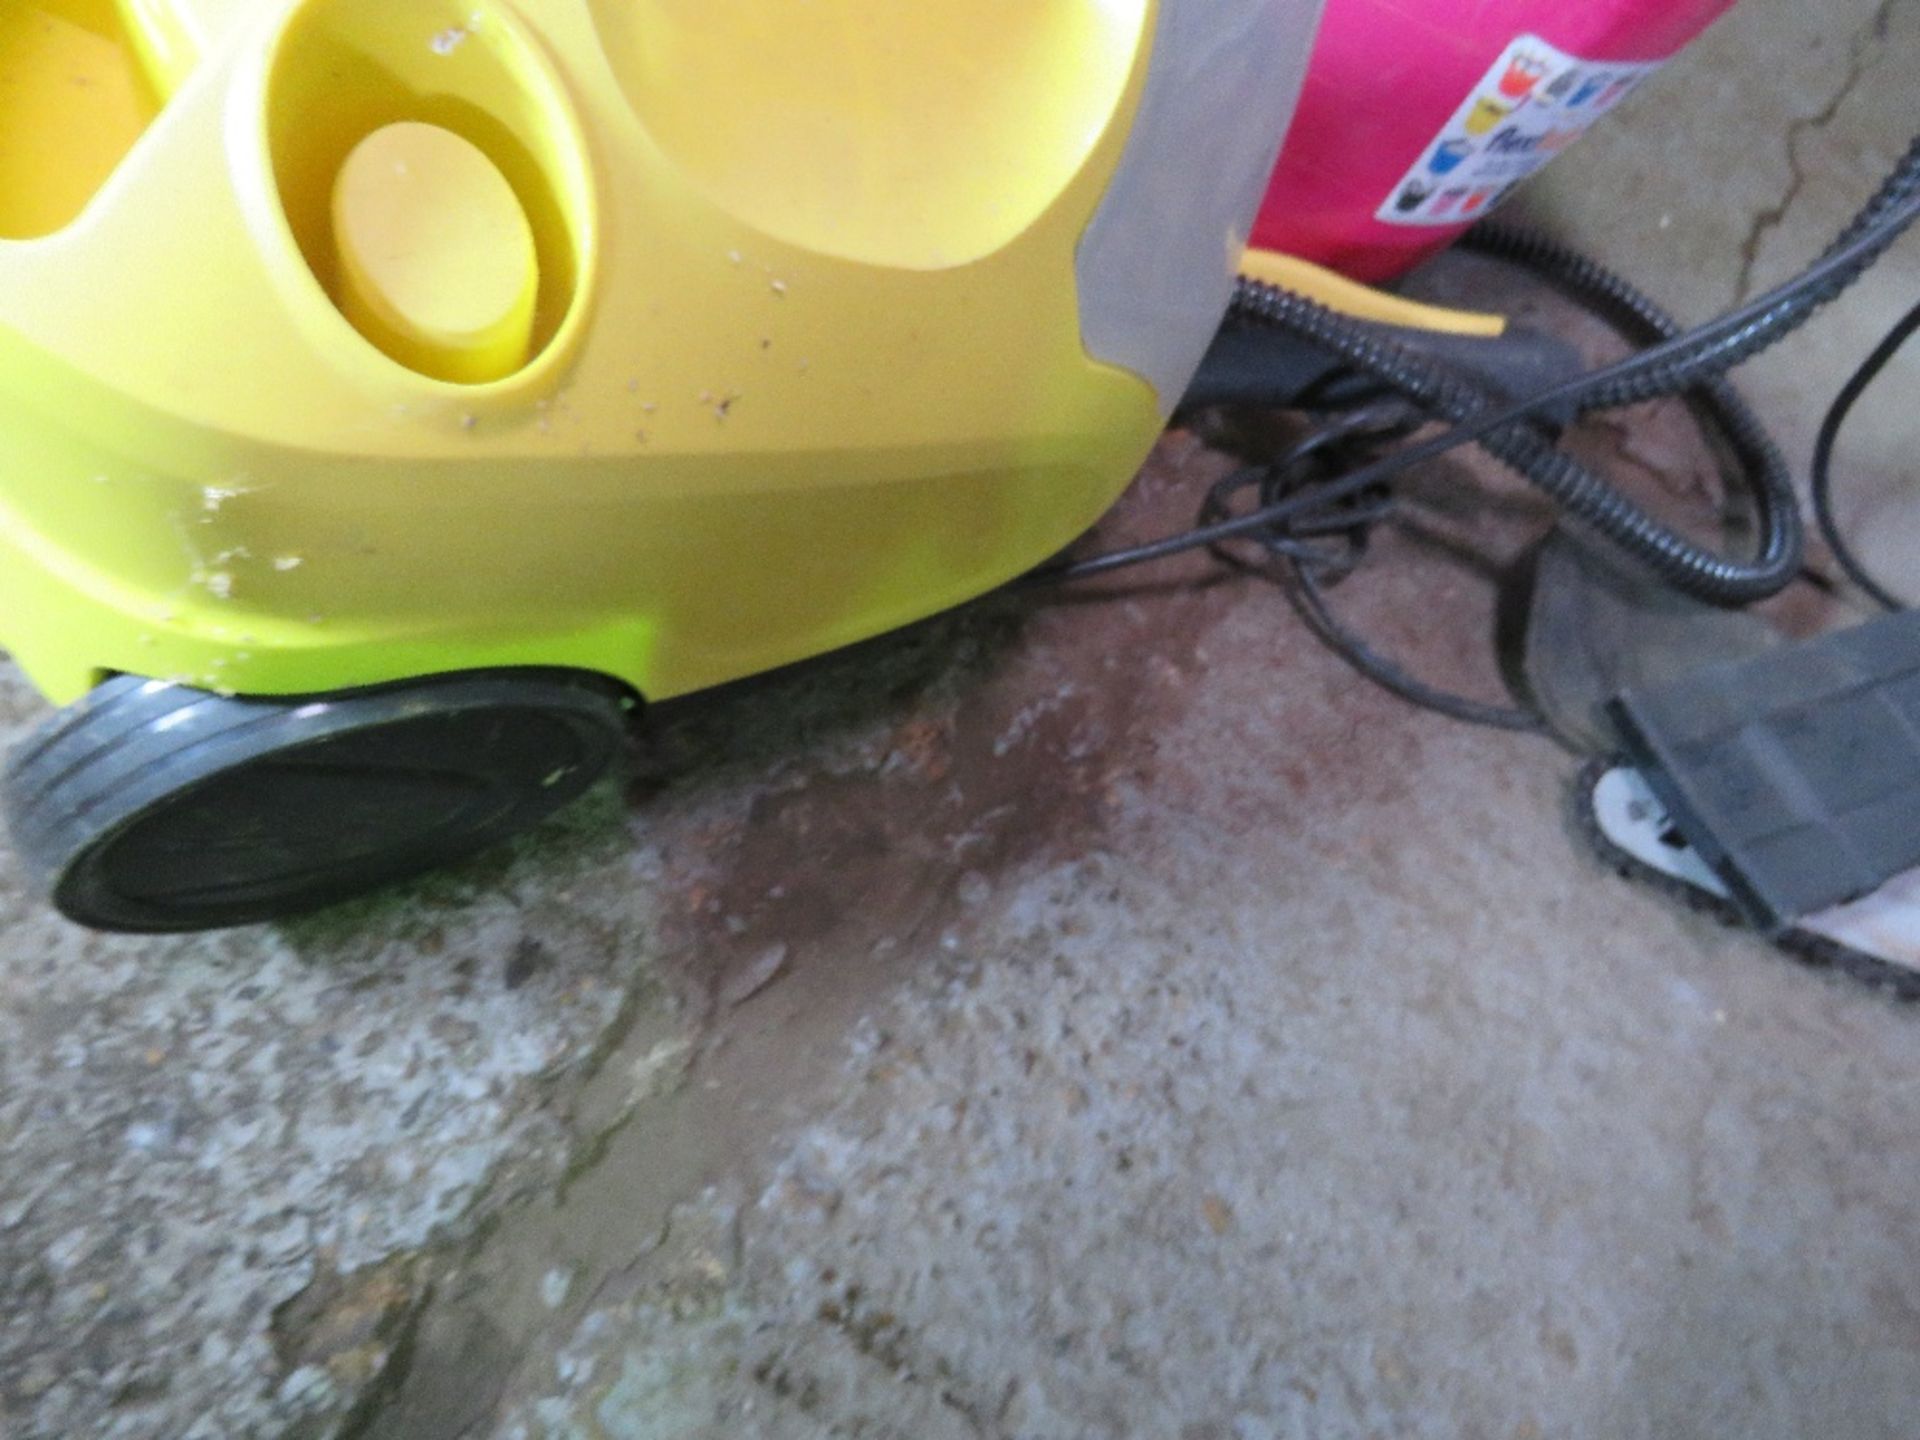 STEAM CLEANER UNIT PLUS A VACUUM AND CLEANING SUNDRIES. - Image 4 of 4